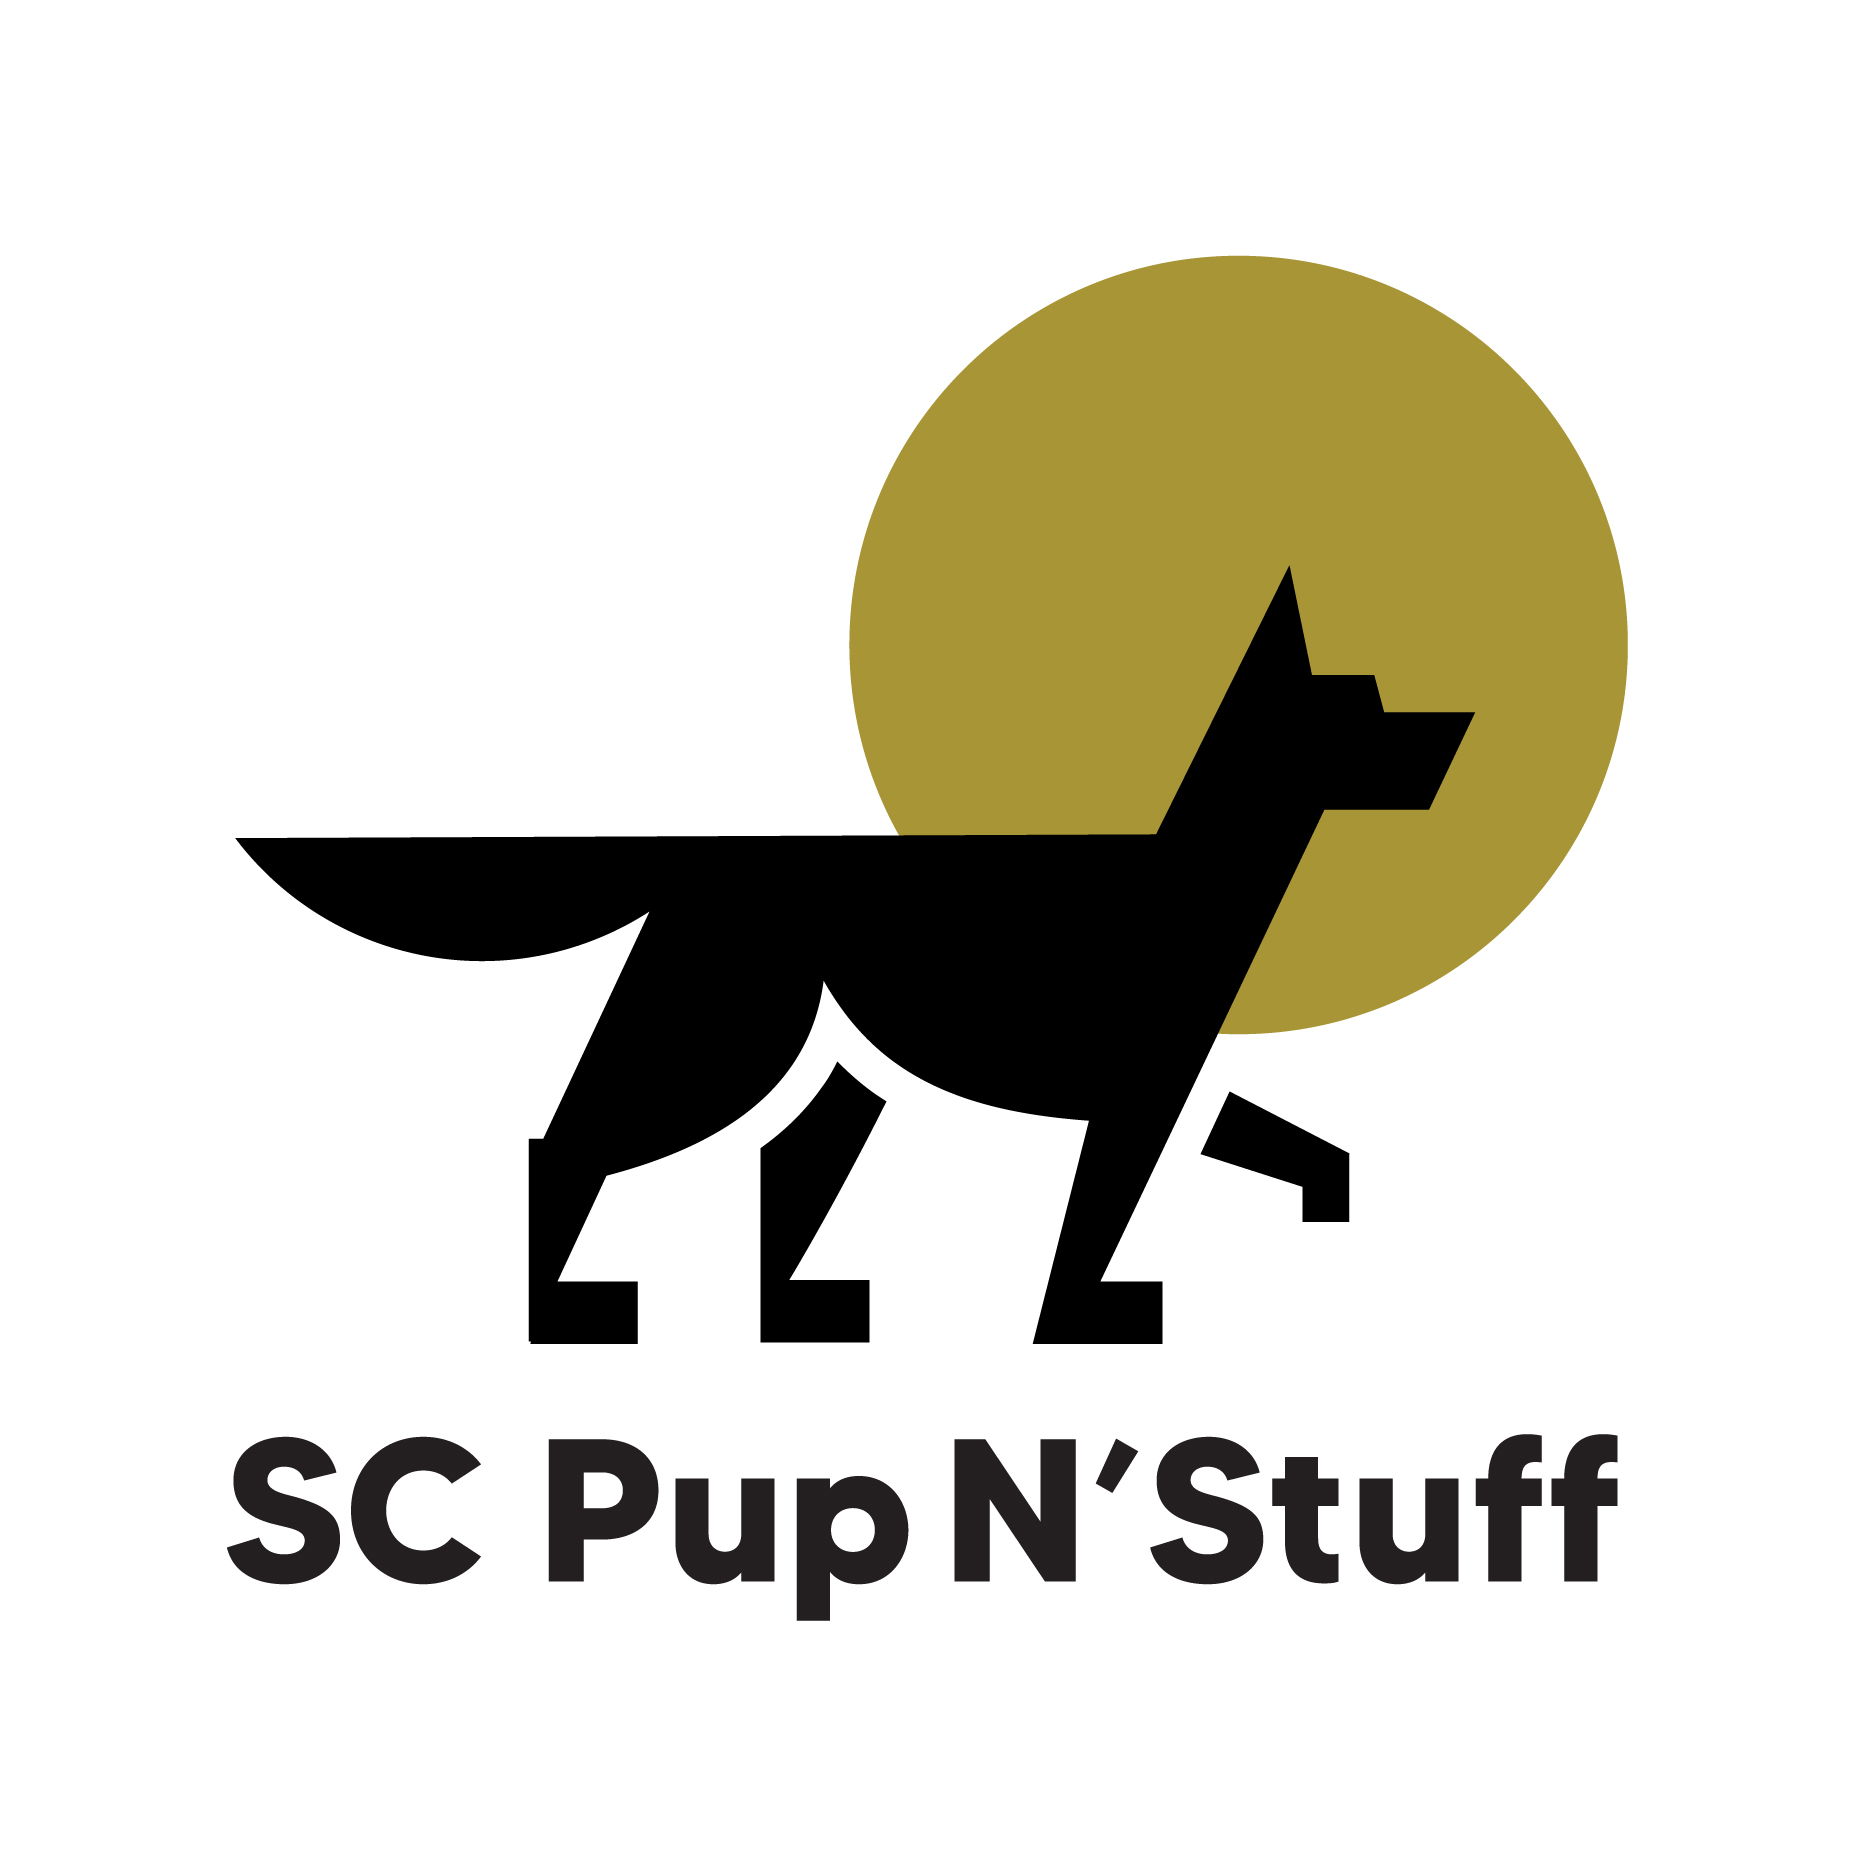 SC Pup N' Stuff by Stellen Design  logo design by logo designer Stellen Design for your inspiration and for the worlds largest logo competition